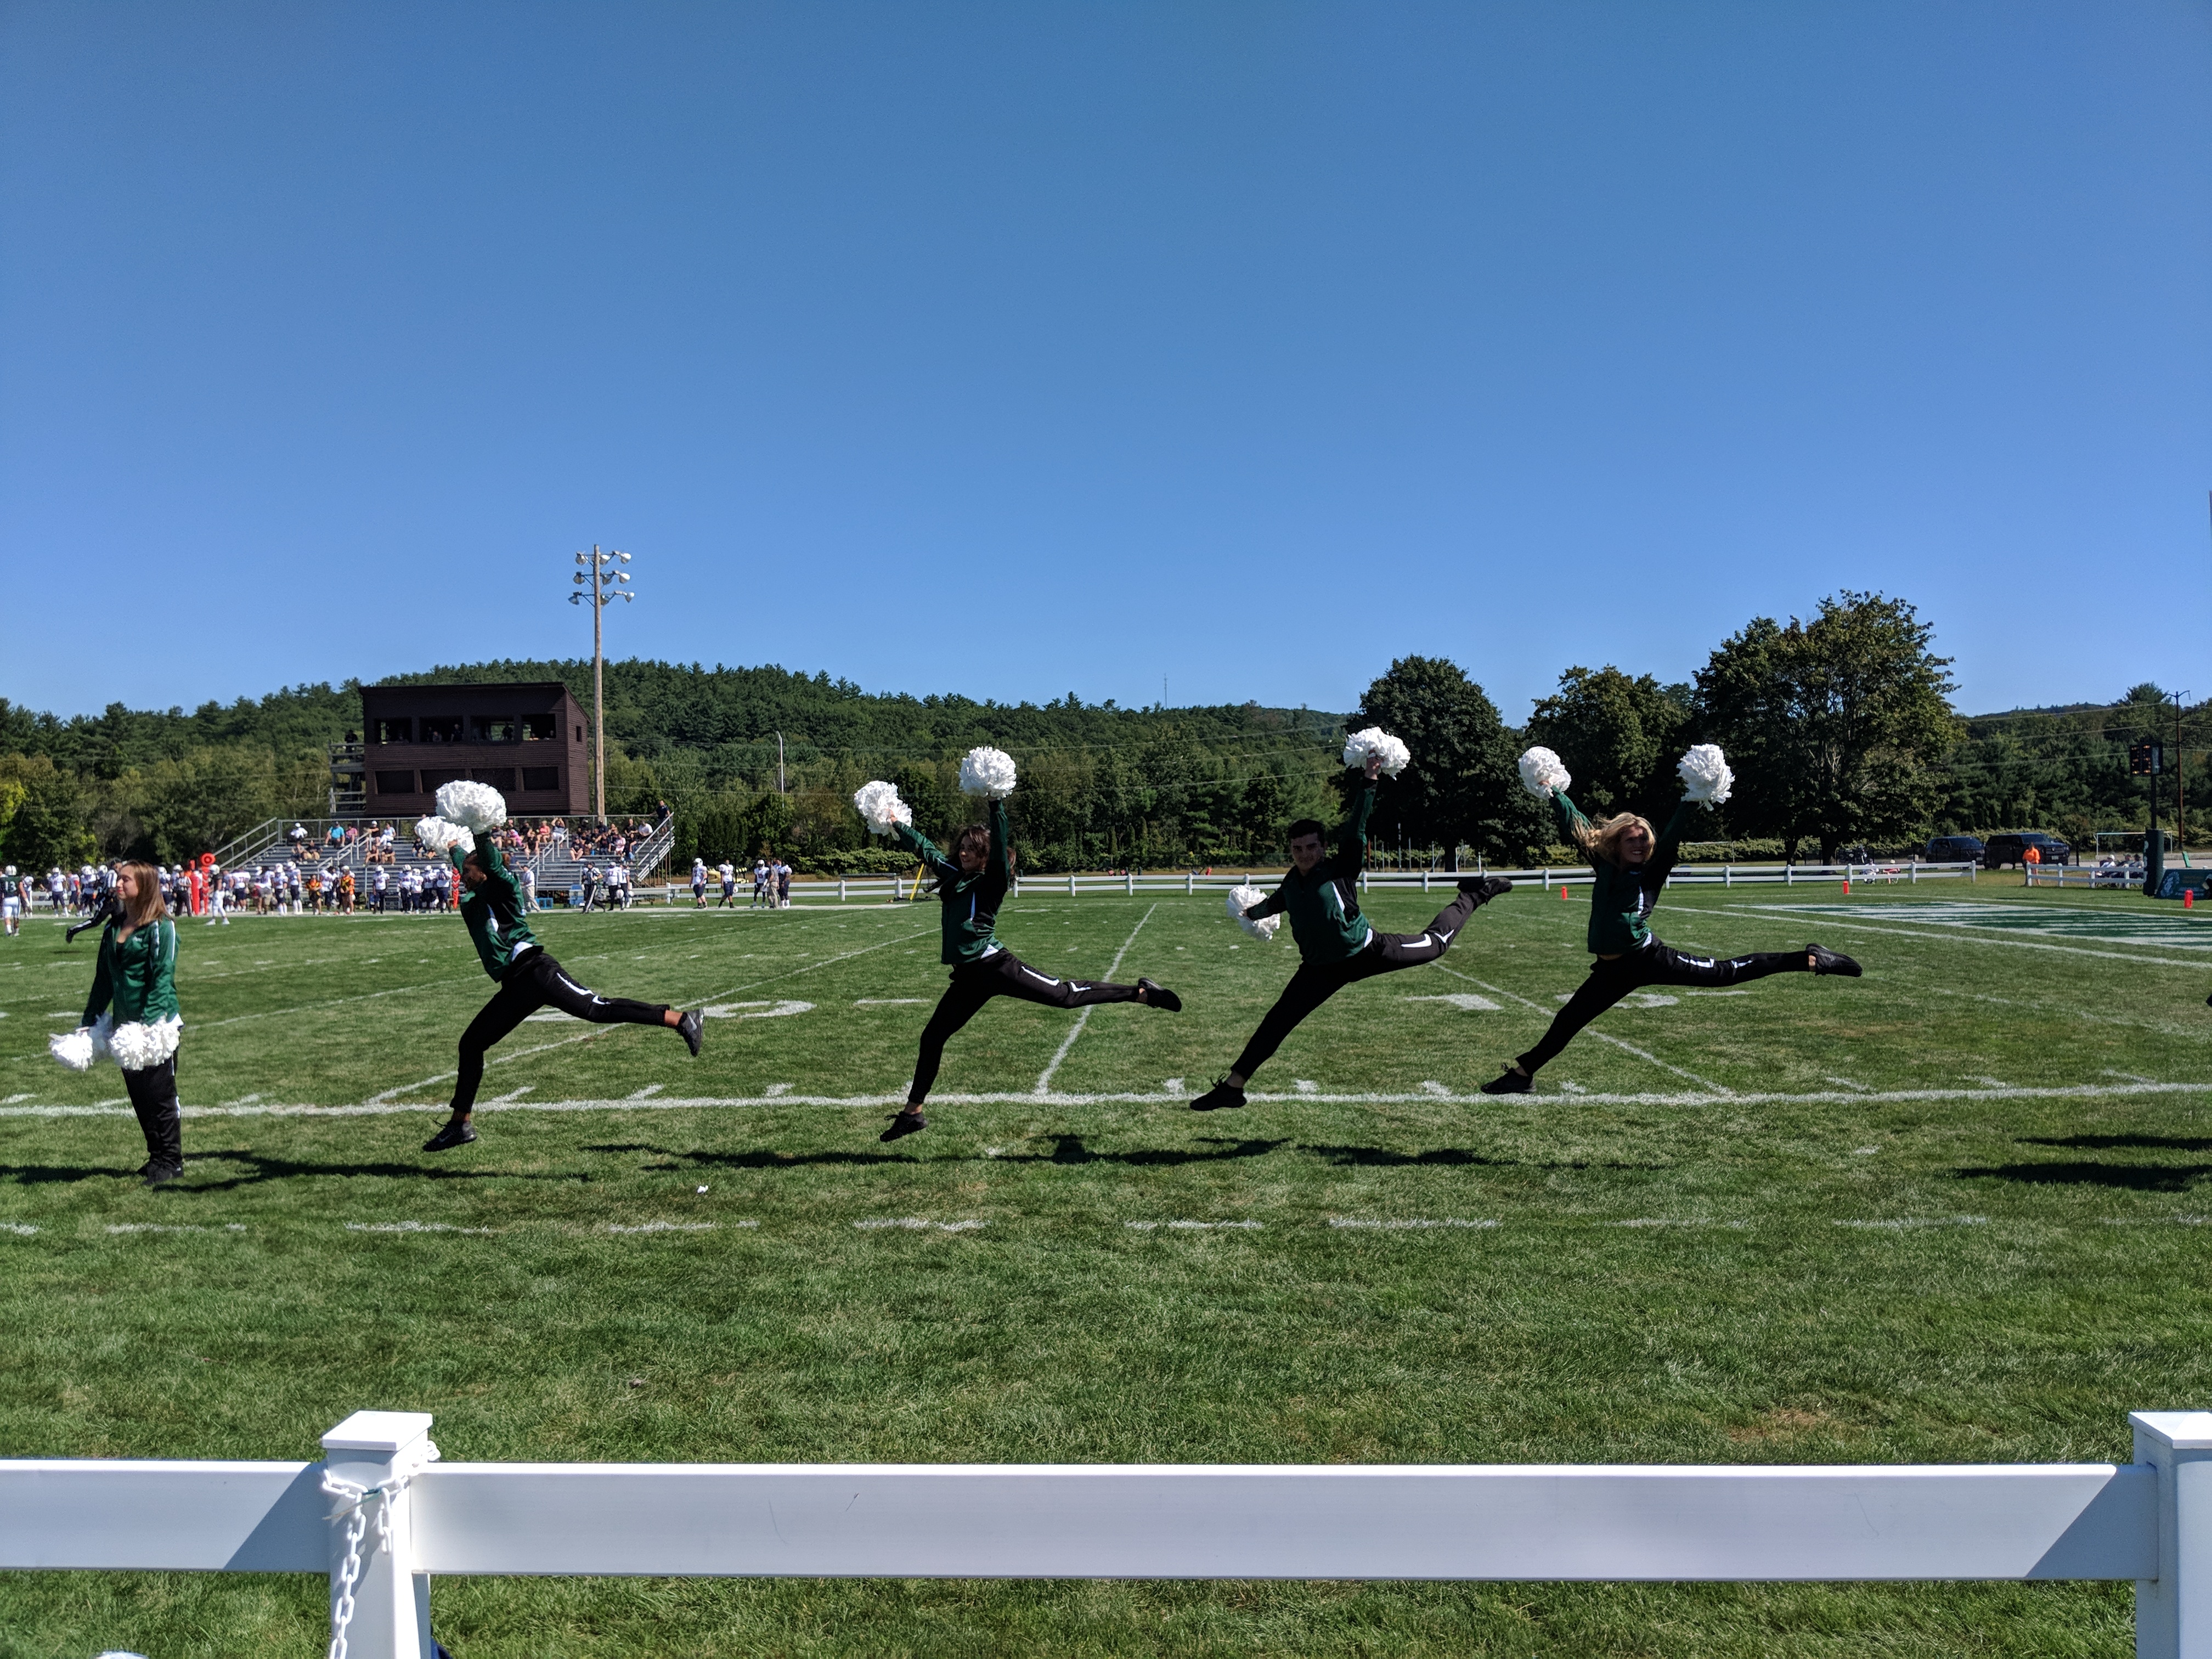 Plymouth State Dance Team performing on the sidelines